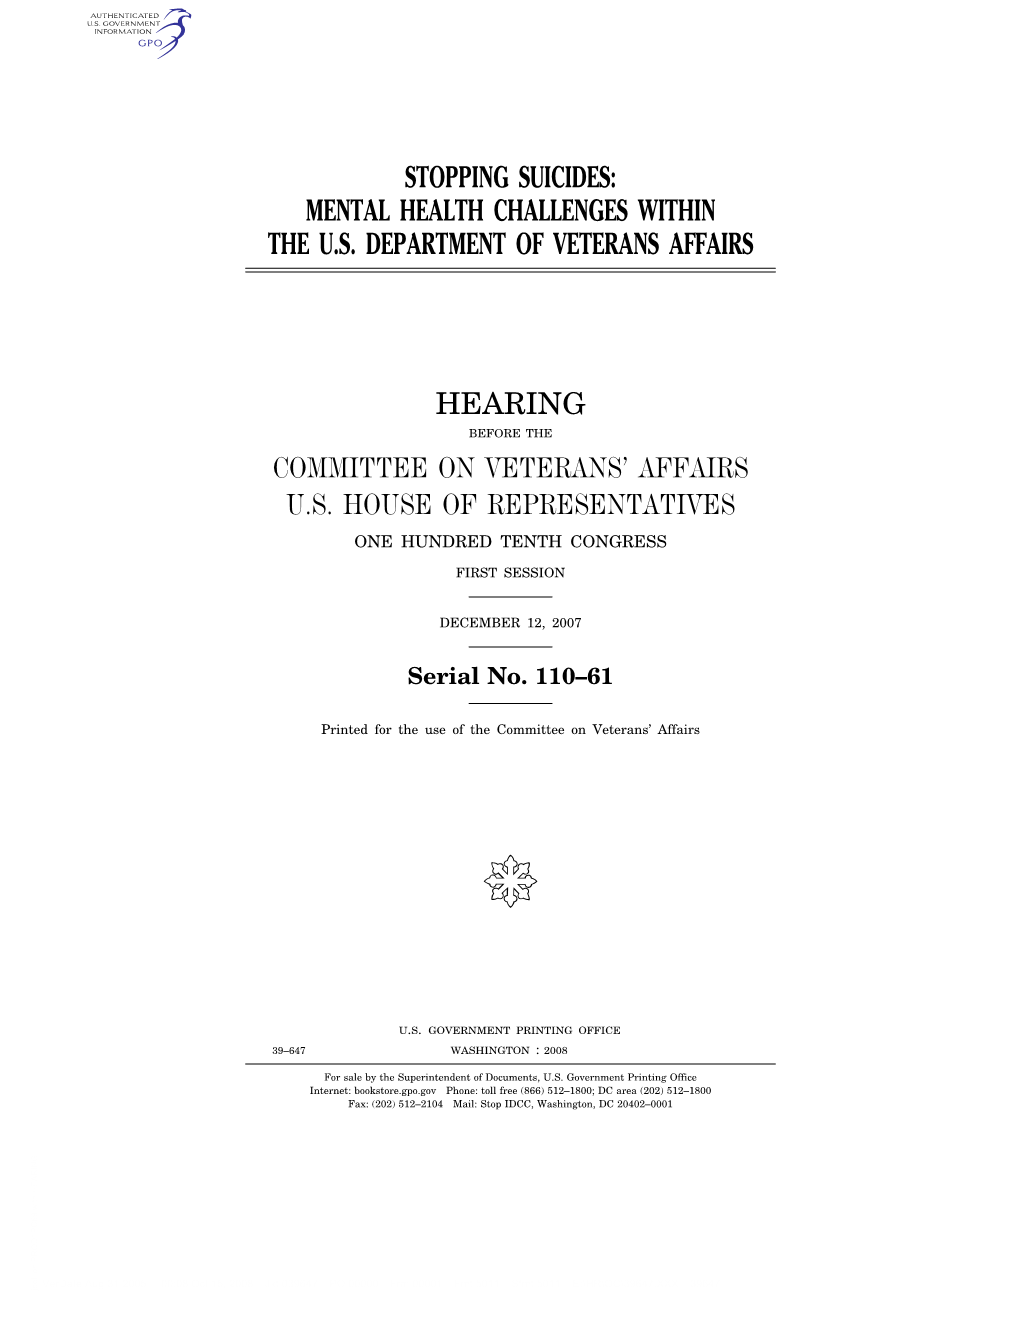 Mental Health Challenges Within the Us Department of Veterans Affairs